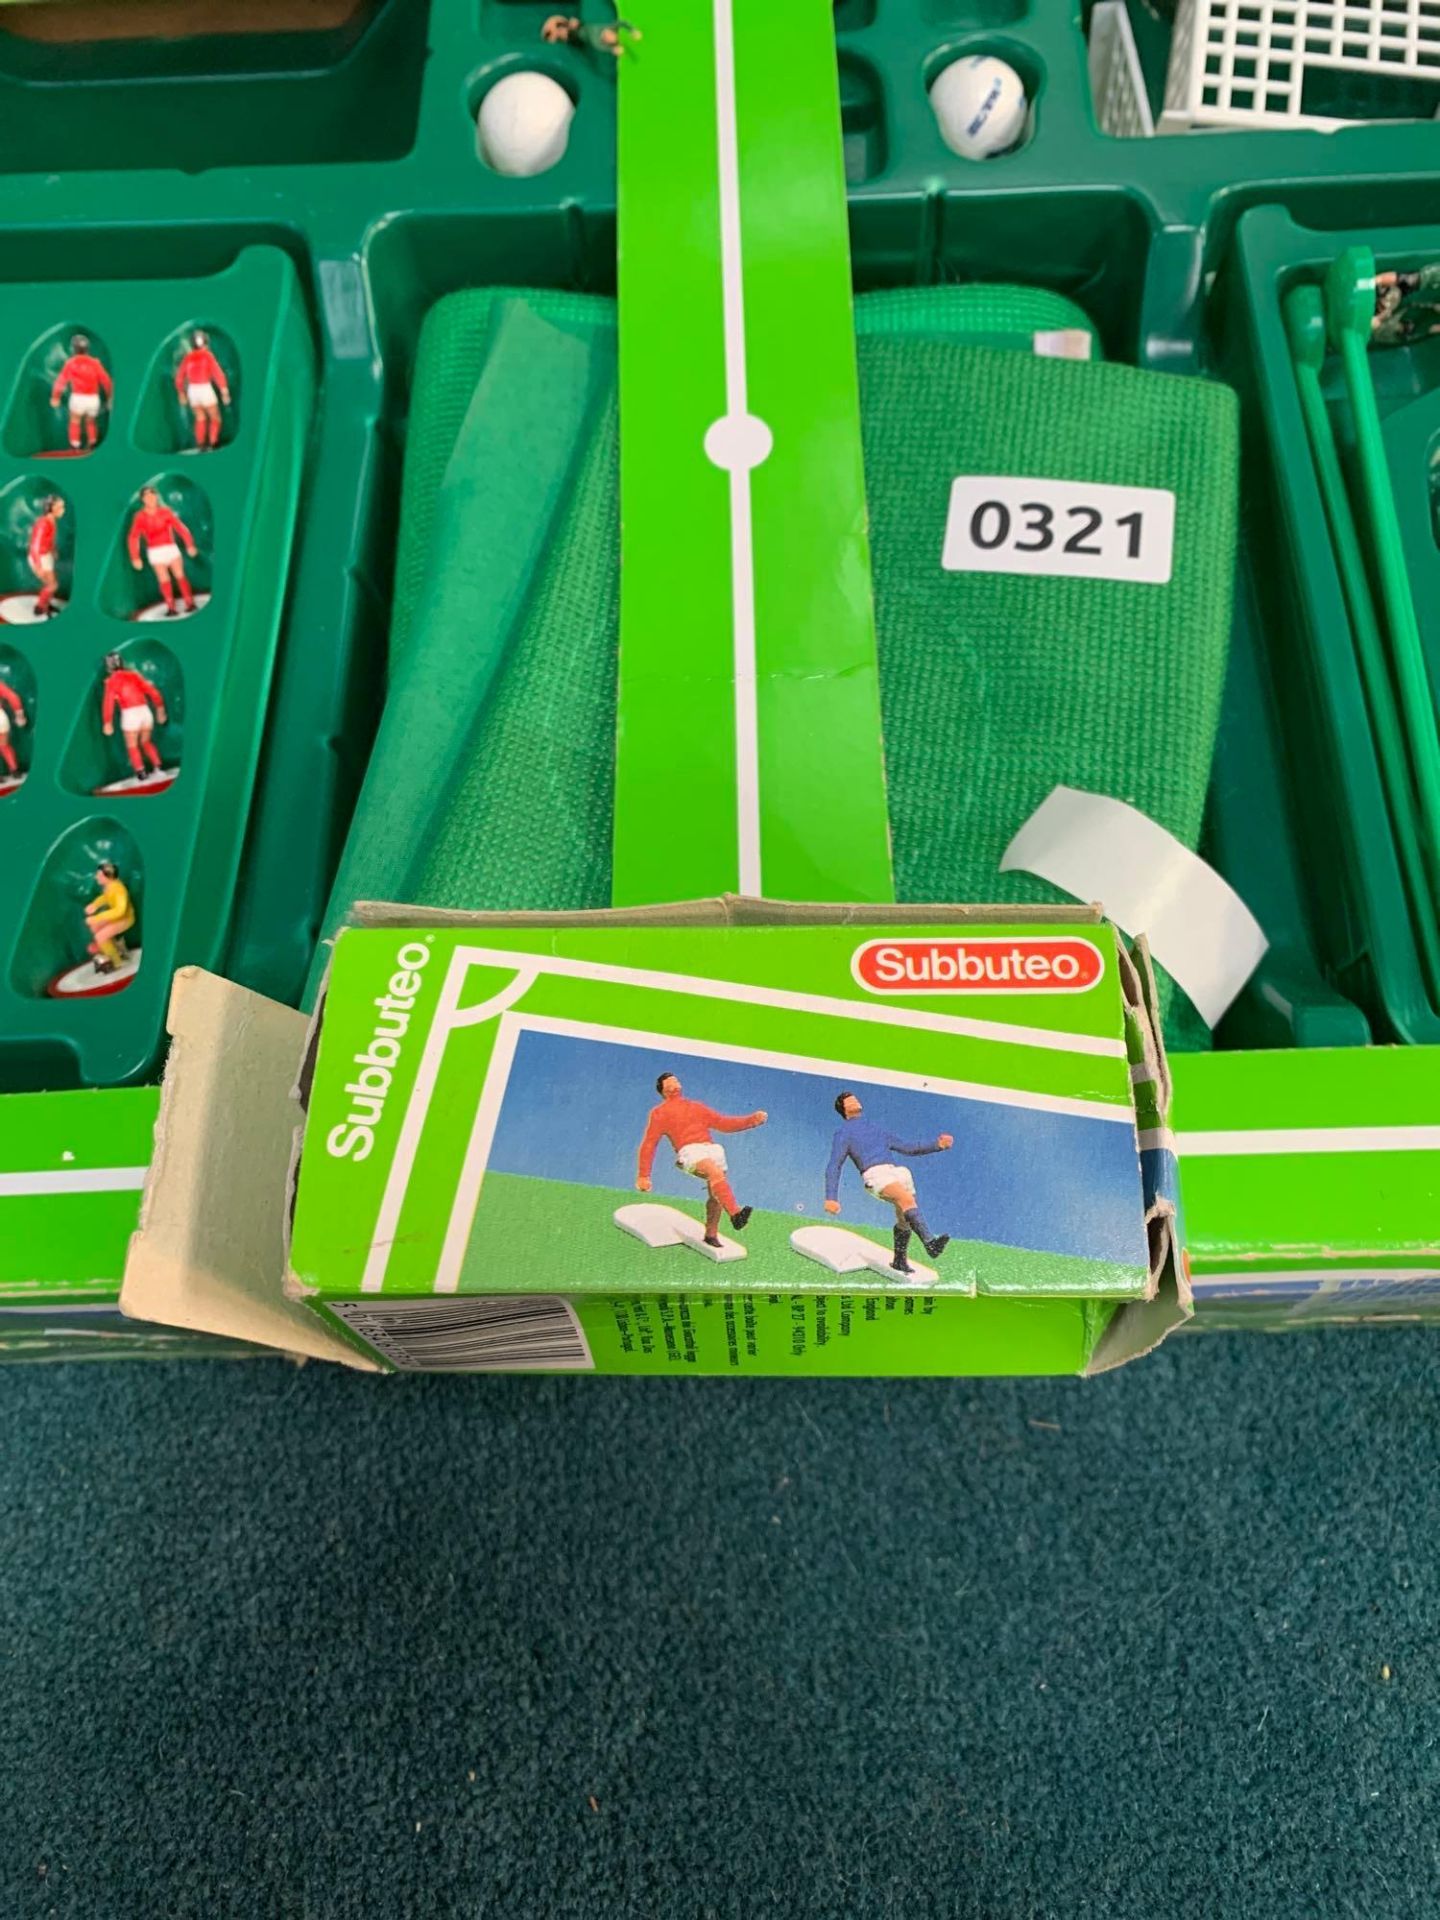 Subbuteo Table Soccer Number 60140 And Subbuteo 61131 Included - Image 7 of 8